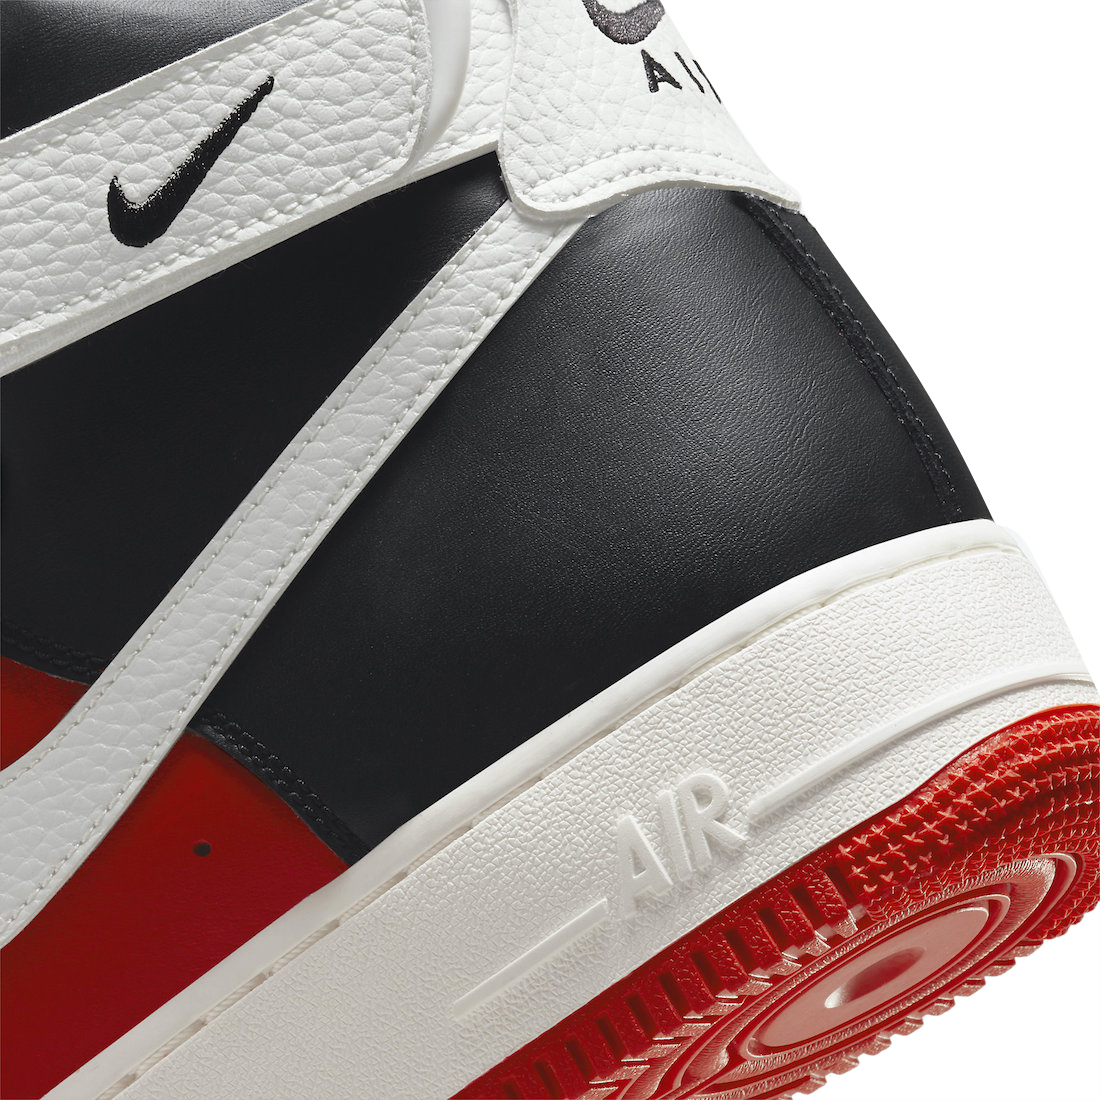 Quick Look At The NBA 75th Anniversary Nike Air Force 1 High Black Chile Red  & Buy It Now